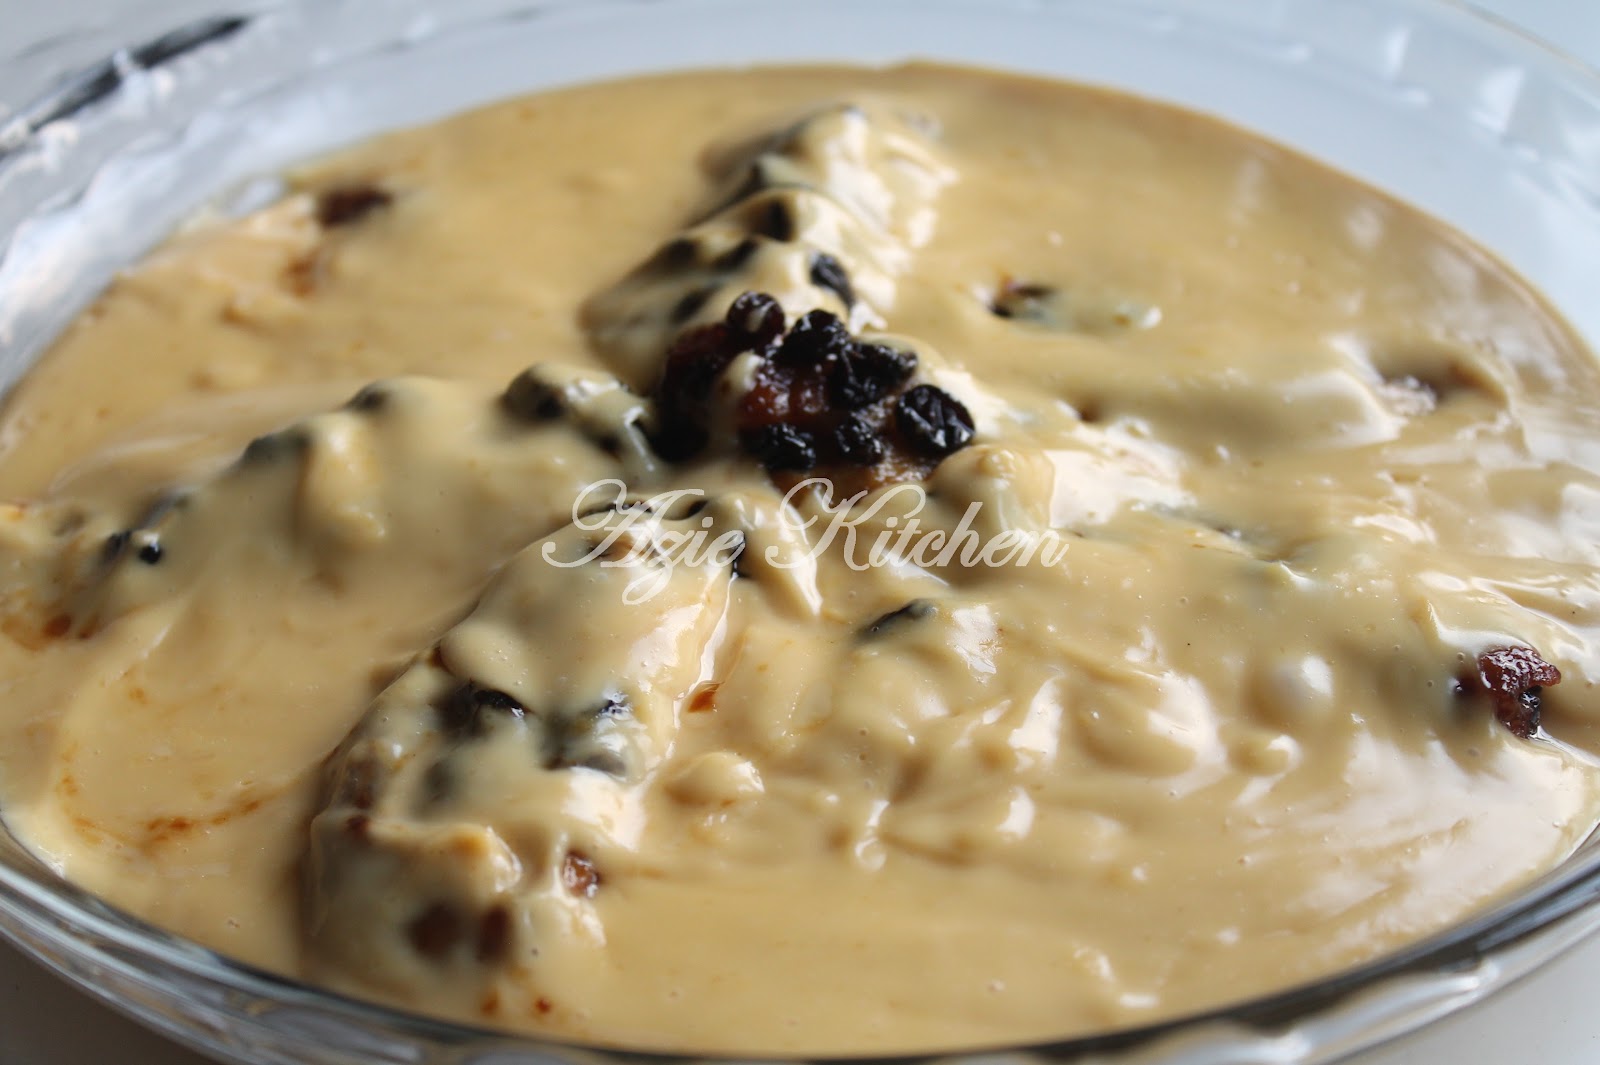 Puding Pisang Emas - Azie Kitchen